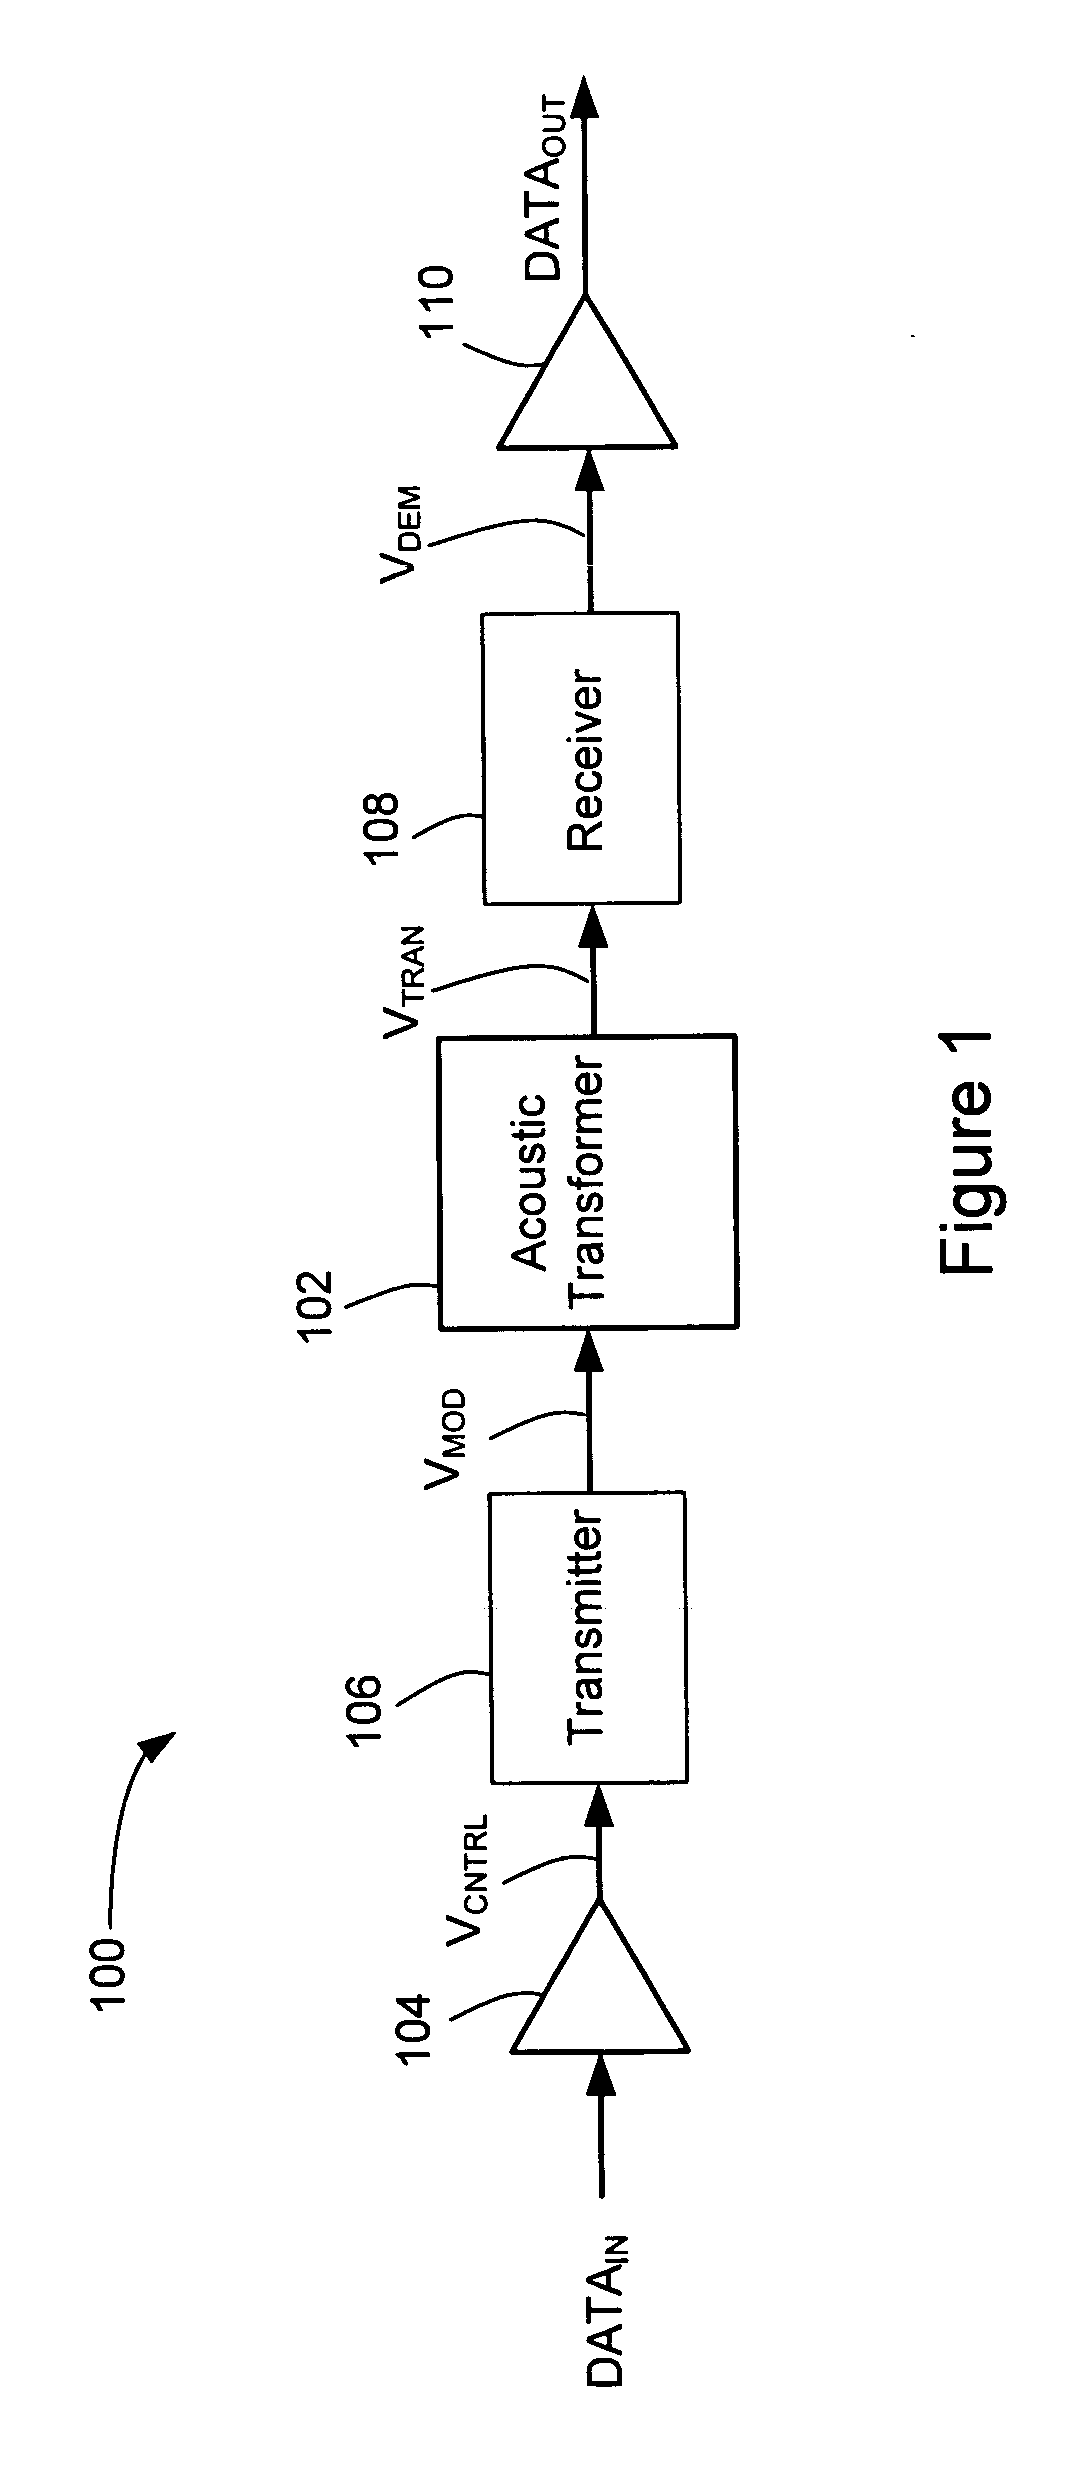 Dual path acoustic data coupling system and method